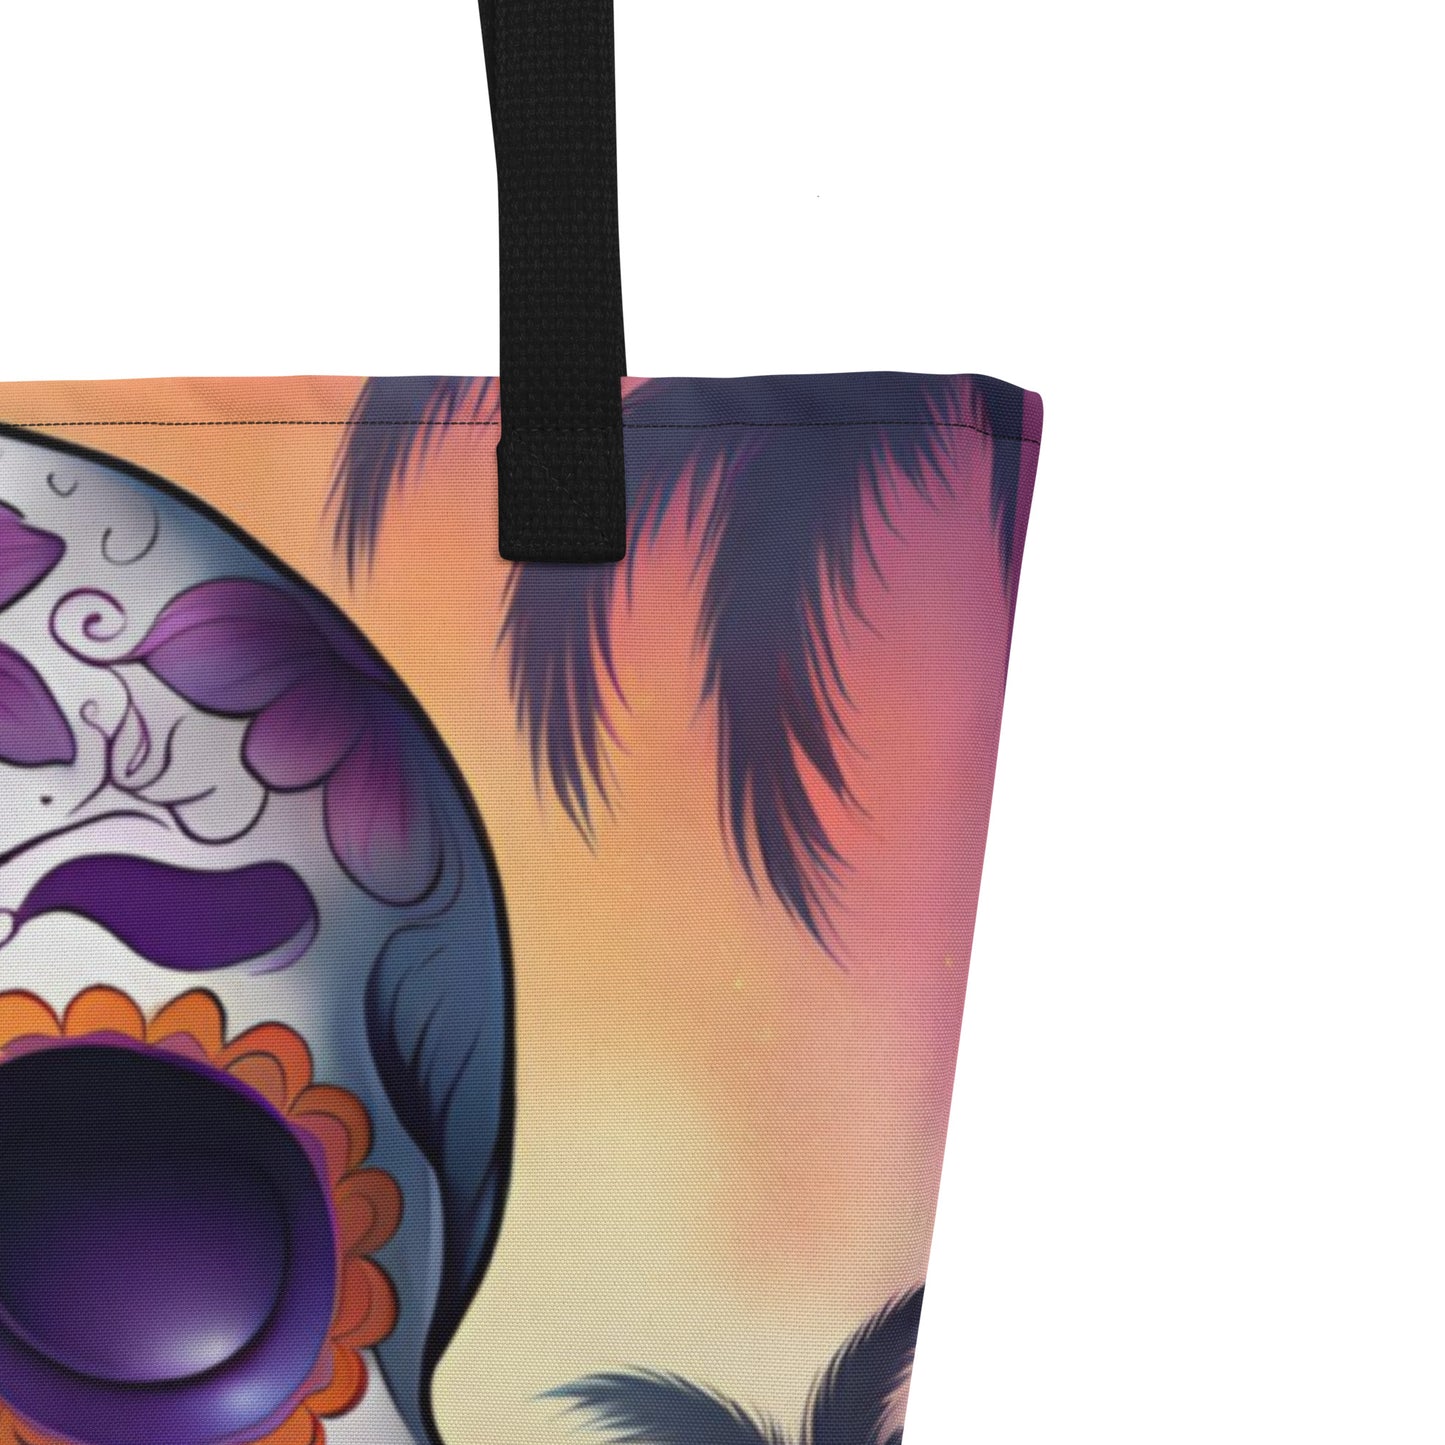 PINK SUNSET SKULL LARGE BEACH TOTE